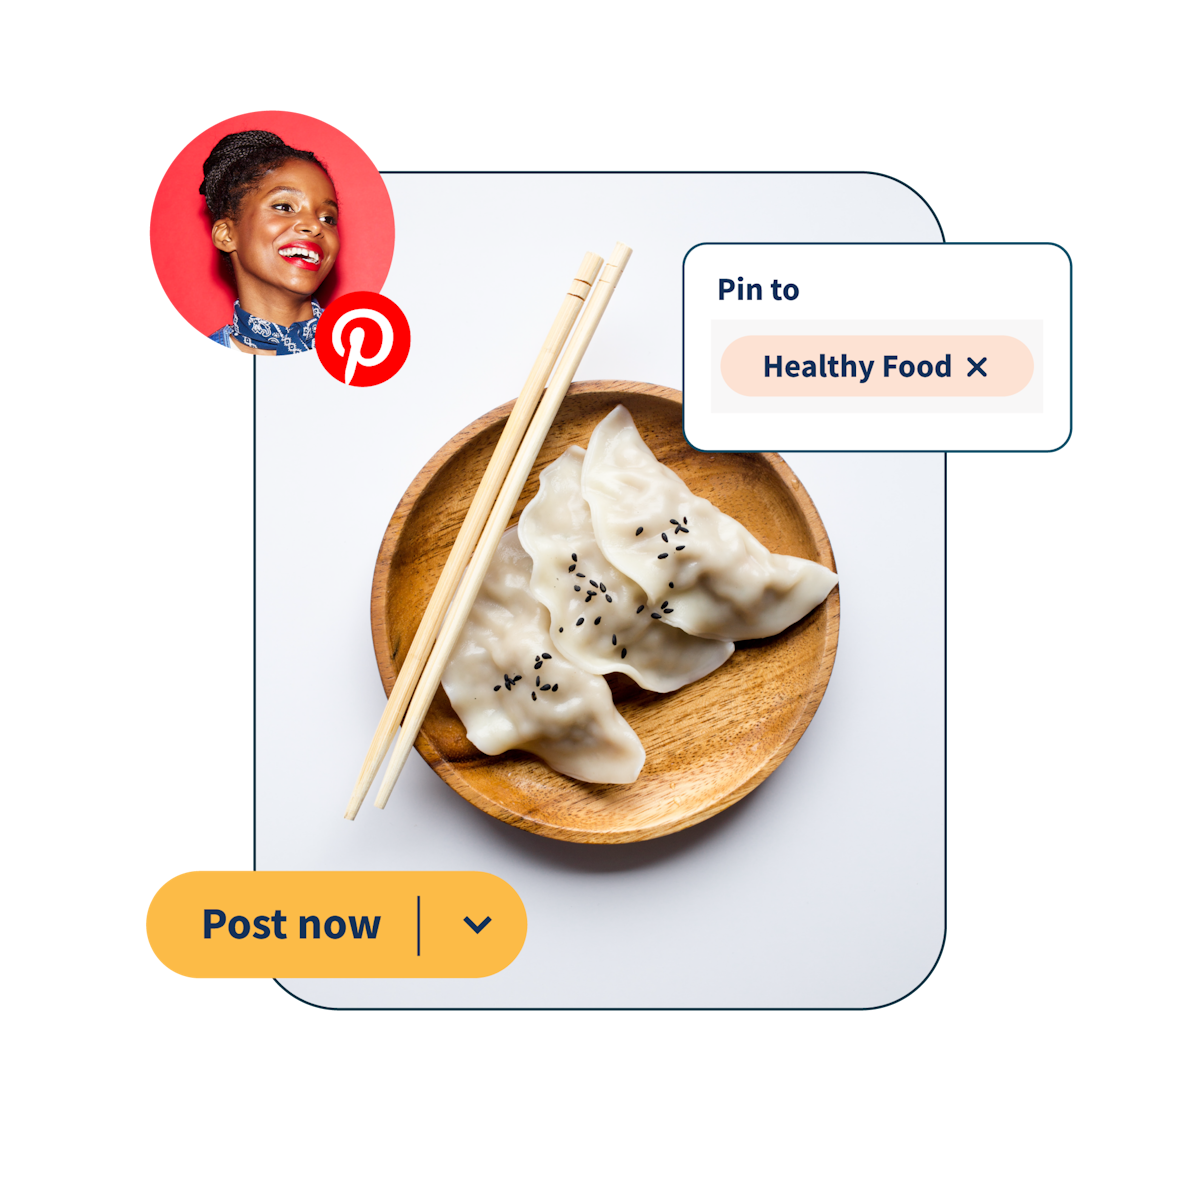 Picture of dumplings on a plate with 2 popups saying "pin to healthy food" and "post now"